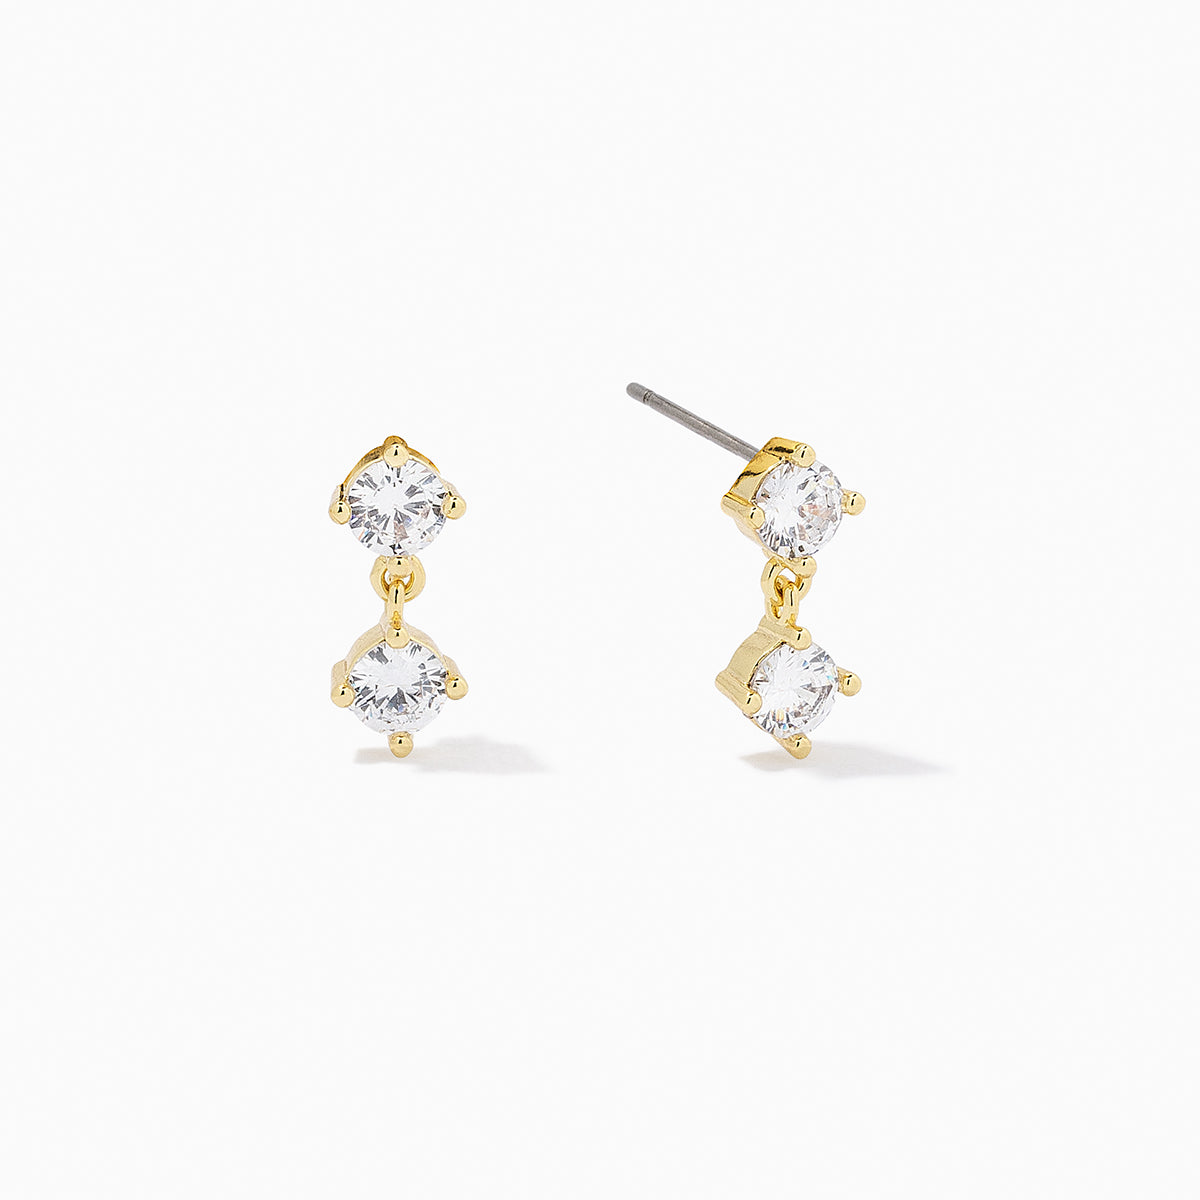 Spotlight Earrings | Gold | Product Image | Uncommon James